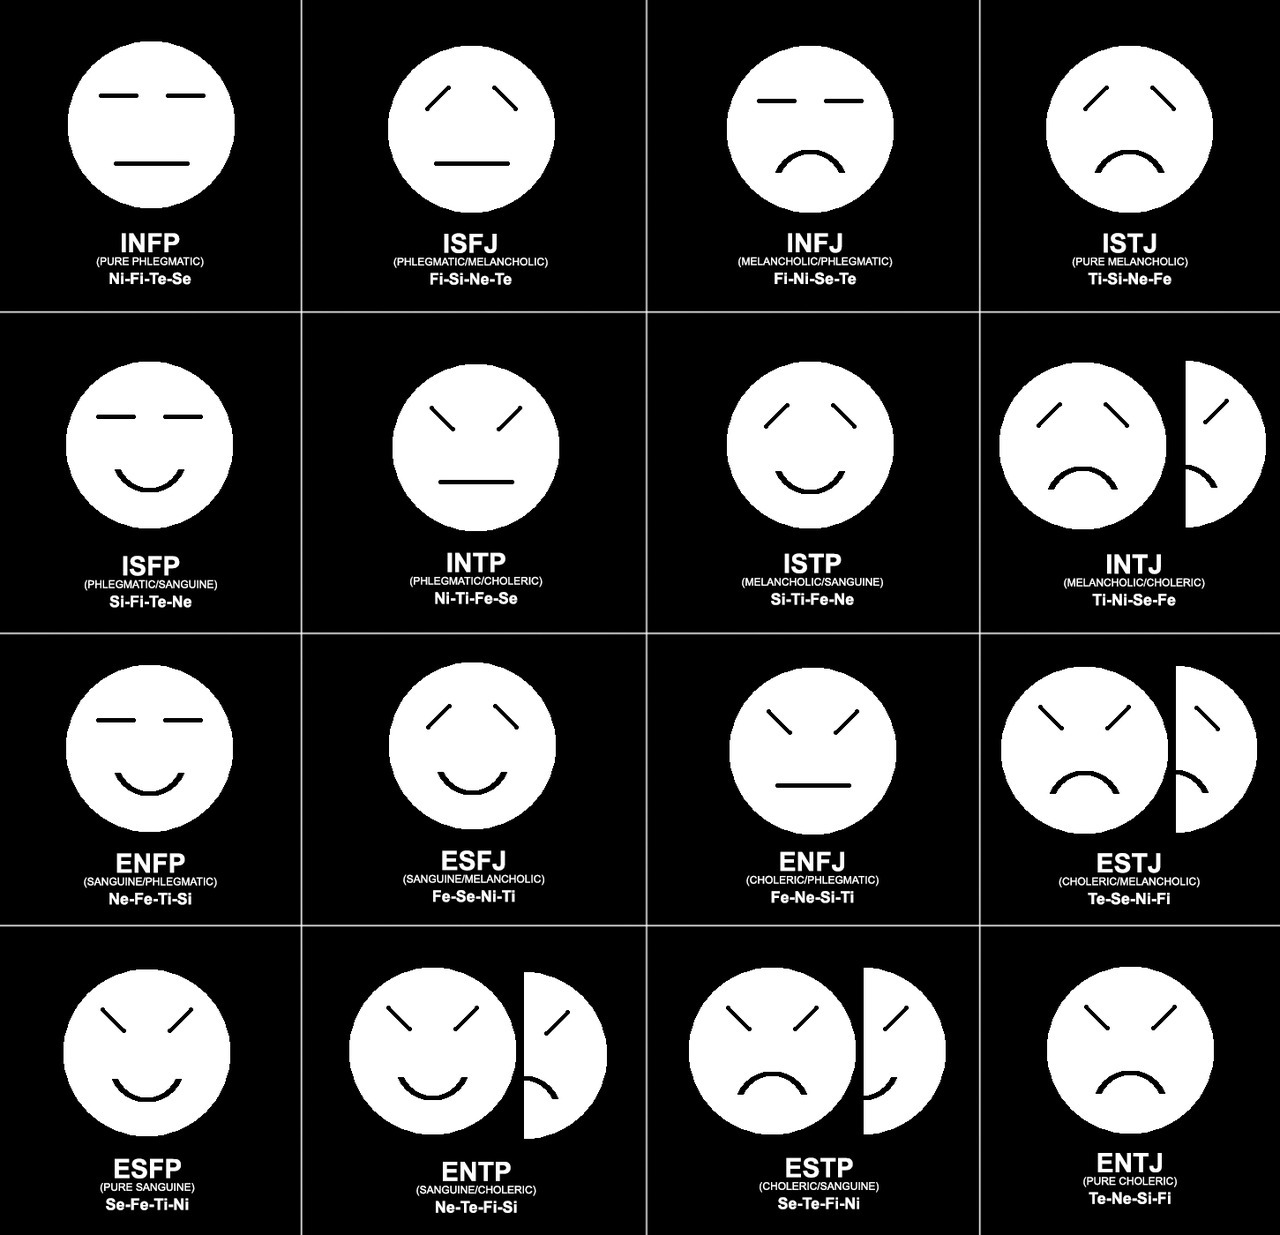 The types are not particular emotions or faces, of course. 